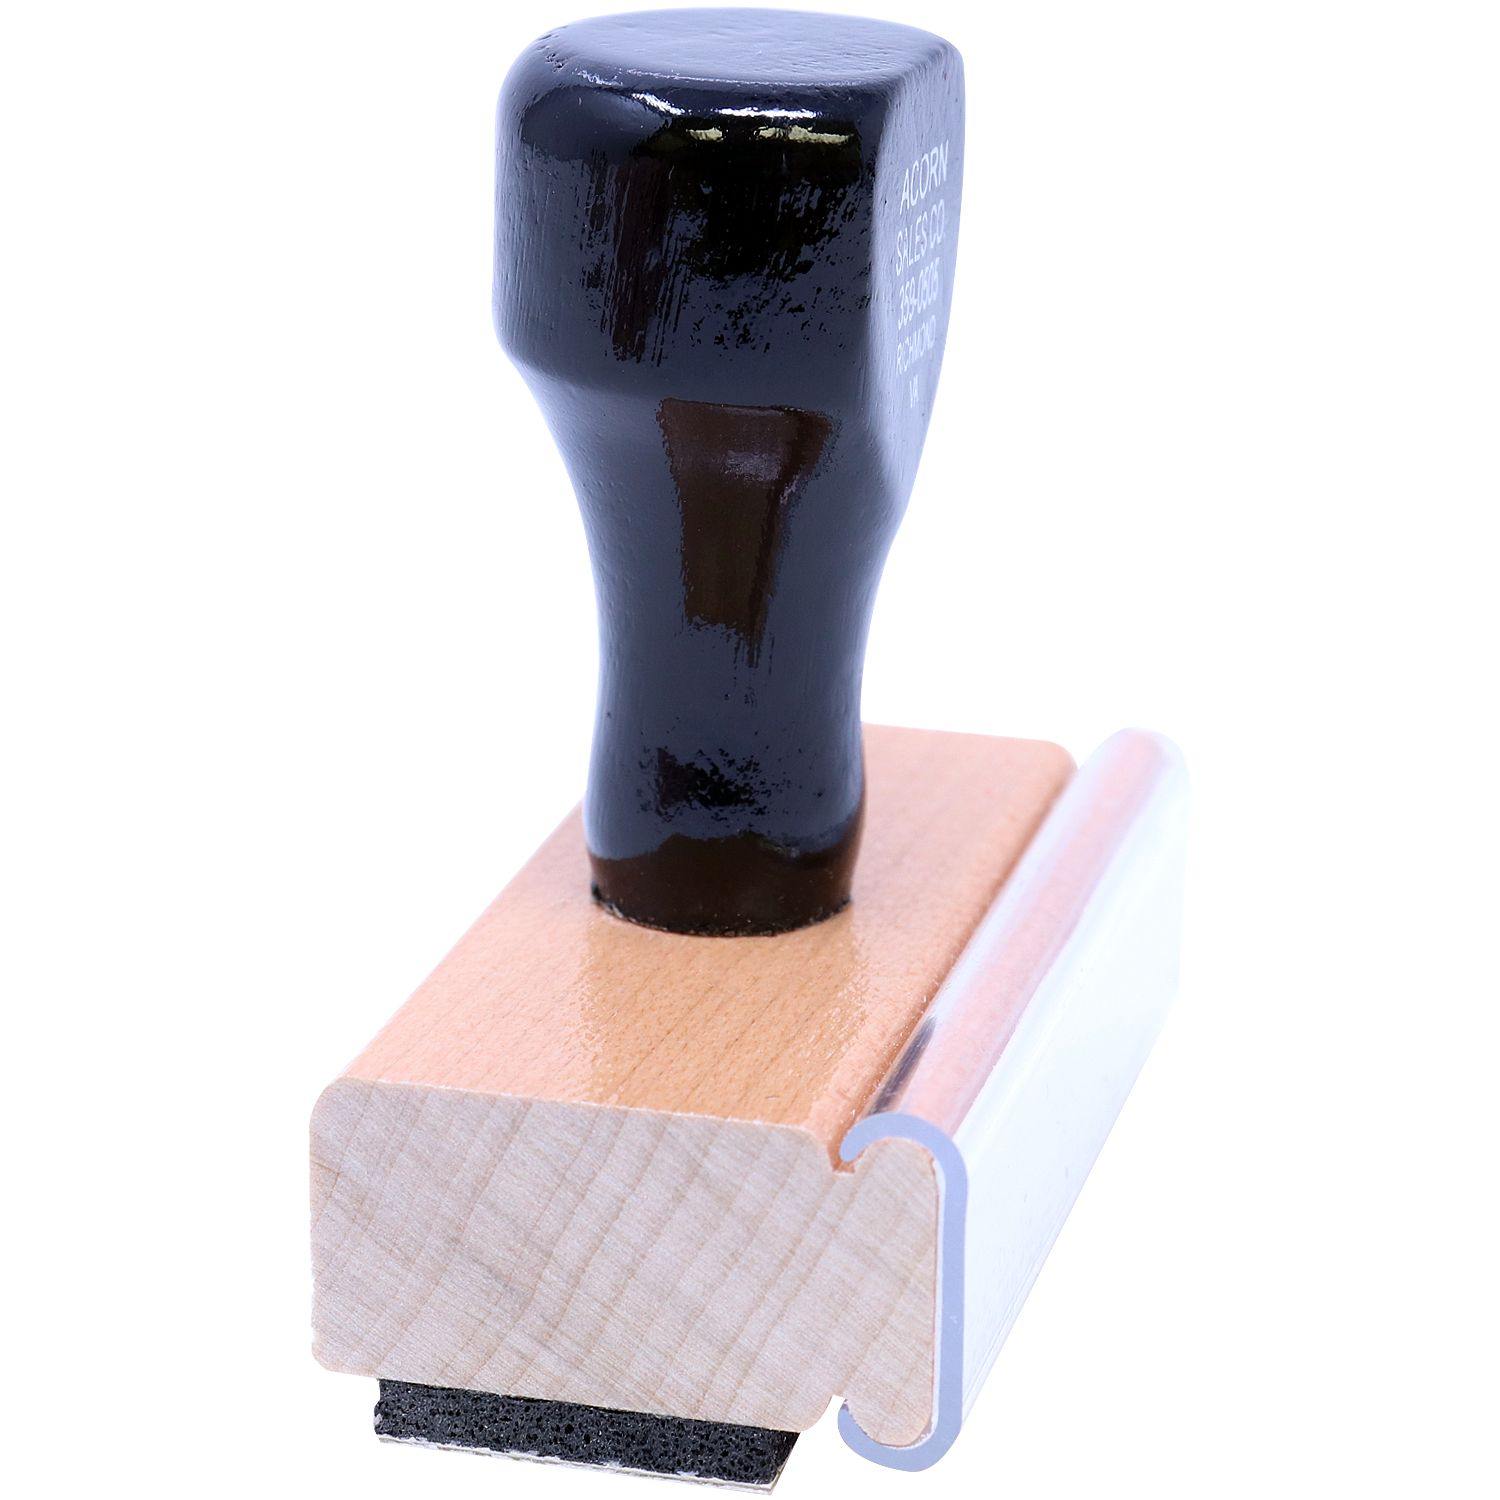 Outline Important Rubber Stamp - Engineer Seal Stamps - Brand_Acorn, Impression Size_Small, Stamp Type_Regular Stamp, Type of Use_Office